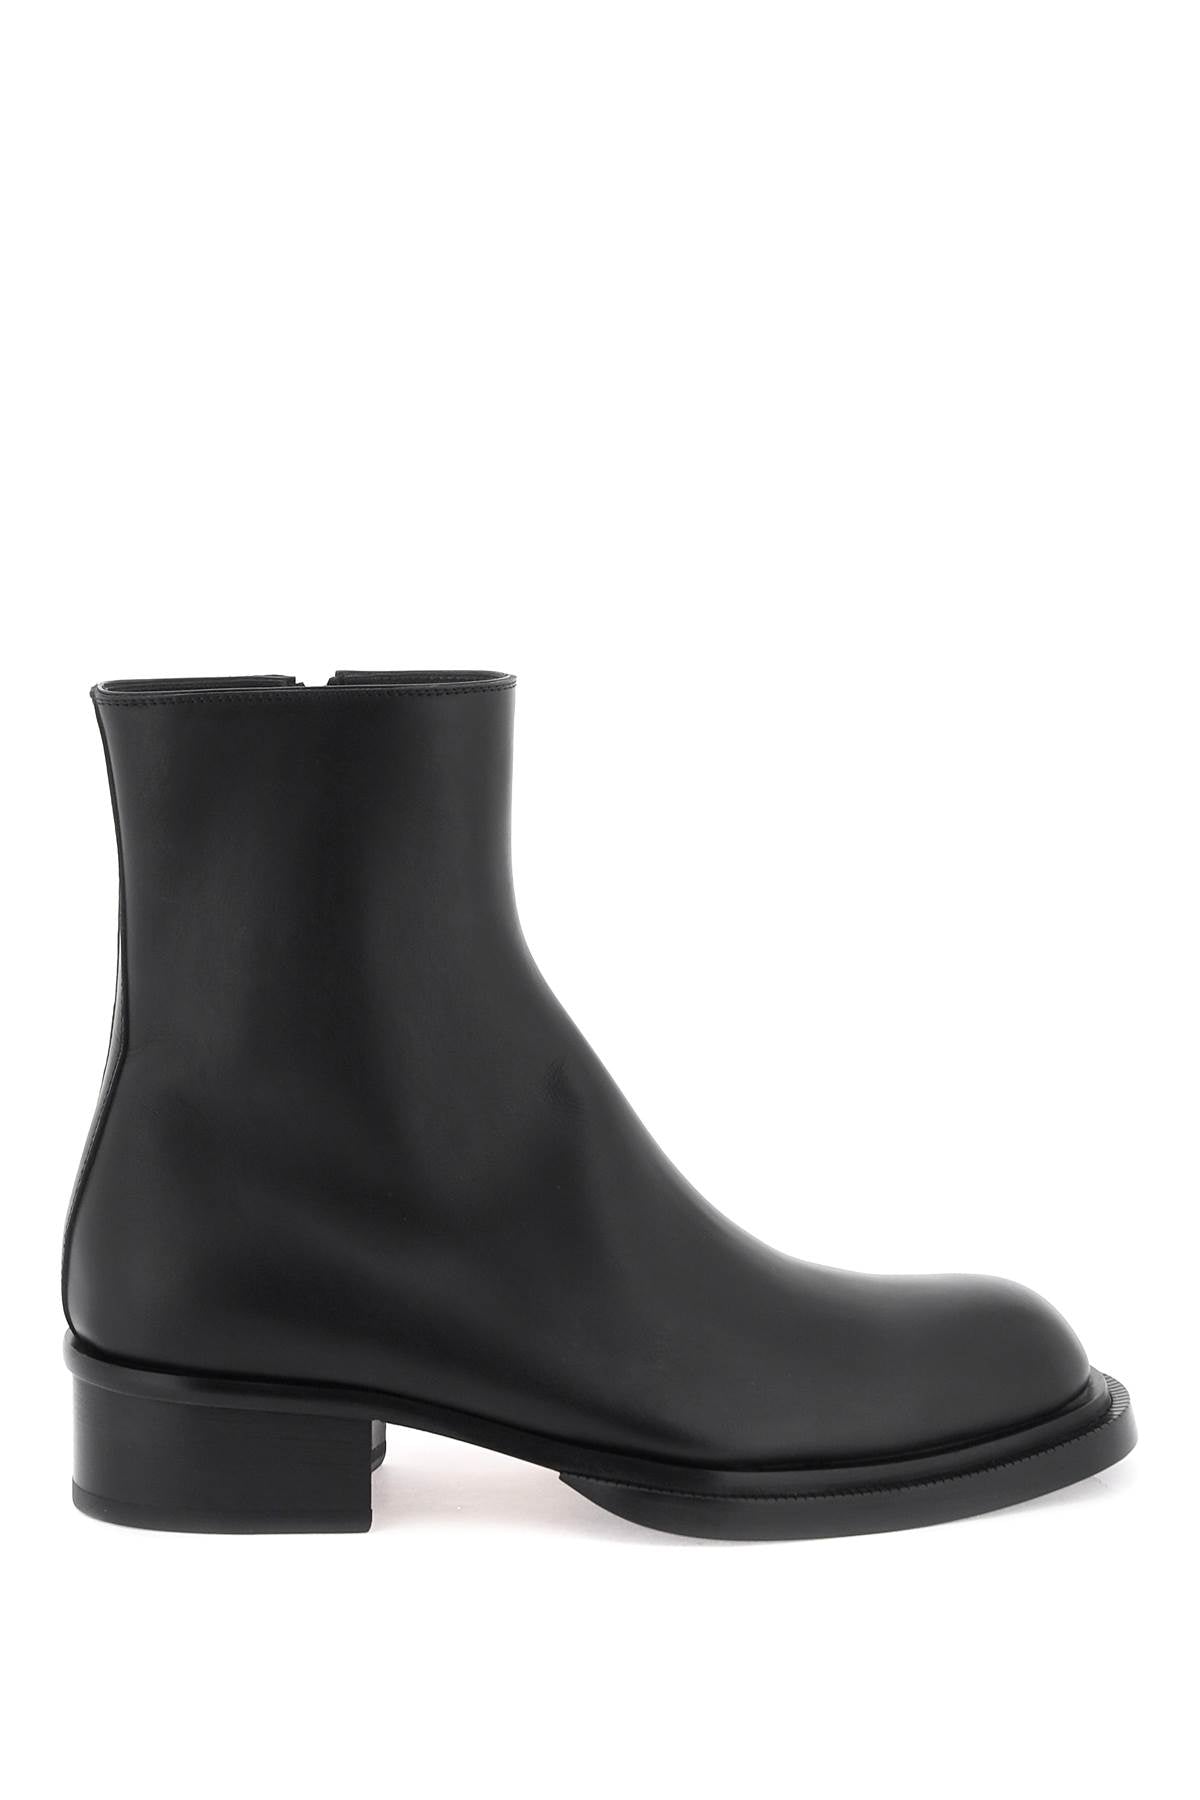 Alexander mcqueen cuban stack ankle boots-0